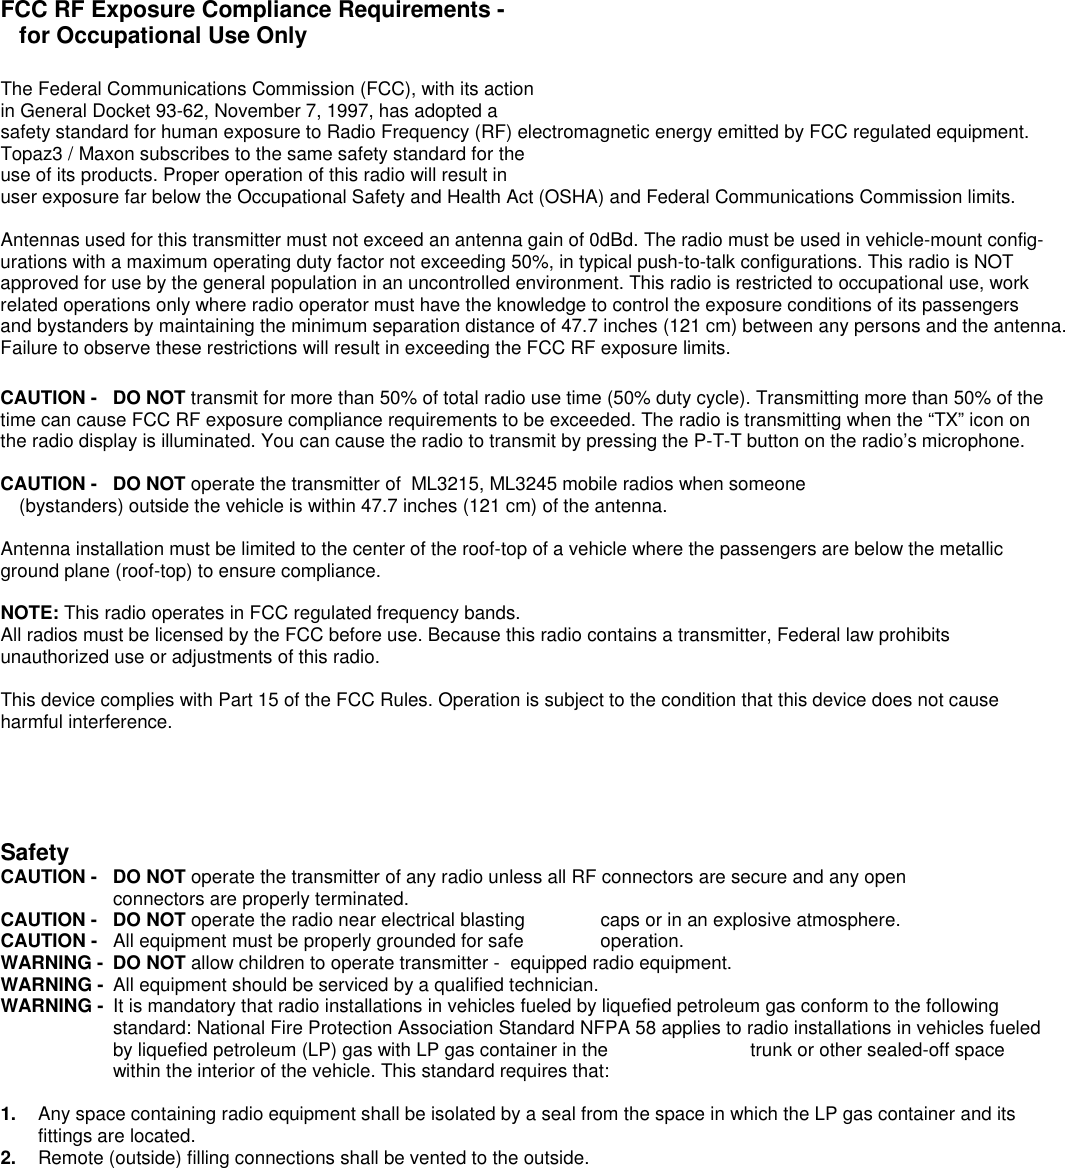 FCC RF Exposure Compliance Requirements -for Occupational Use OnlyThe Federal Communications Commission (FCC), with its actionin General Docket 93-62, November 7, 1997, has adopted asafety standard for human exposure to Radio Frequency (RF) electromagnetic energy emitted by FCC regulated equipment.Topaz3 / Maxon subscribes to the same safety standard for theuse of its products. Proper operation of this radio will result inuser exposure far below the Occupational Safety and Health Act (OSHA) and Federal Communications Commission limits.Antennas used for this transmitter must not exceed an antenna gain of 0dBd. The radio must be used in vehicle-mount config-urations with a maximum operating duty factor not exceeding 50%, in typical push-to-talk configurations. This radio is NOTapproved for use by the general population in an uncontrolled environment. This radio is restricted to occupational use, workrelated operations only where radio operator must have the knowledge to control the exposure conditions of its passengersand bystanders by maintaining the minimum separation distance of 47.7 inches (121 cm) between any persons and the antenna.Failure to observe these restrictions will result in exceeding the FCC RF exposure limits.CAUTION - DO NOT transmit for more than 50% of total radio use time (50% duty cycle). Transmitting more than 50% of thetime can cause FCC RF exposure compliance requirements to be exceeded. The radio is transmitting when the “TX” icon onthe radio display is illuminated. You can cause the radio to transmit by pressing the P-T-T button on the radio’s microphone.CAUTION - DO NOT operate the transmitter of  ML3215, ML3245 mobile radios when someone (bystanders) outside the vehicle is within 47.7 inches (121 cm) of the antenna.Antenna installation must be limited to the center of the roof-top of a vehicle where the passengers are below the metallicground plane (roof-top) to ensure compliance.NOTE: This radio operates in FCC regulated frequency bands.All radios must be licensed by the FCC before use. Because this radio contains a transmitter, Federal law prohibitsunauthorized use or adjustments of this radio.This device complies with Part 15 of the FCC Rules. Operation is subject to the condition that this device does not causeharmful interference.SafetyCAUTION -  DO NOT operate the transmitter of any radio unless all RF connectors are secure and any open connectors are properly terminated.CAUTION -  DO NOT operate the radio near electrical blasting  caps or in an explosive atmosphere.CAUTION -  All equipment must be properly grounded for safe  operation.WARNING -  DO NOT allow children to operate transmitter -  equipped radio equipment.WARNING -  All equipment should be serviced by a qualified technician.WARNING -  It is mandatory that radio installations in vehicles fueled by liquefied petroleum gas conform to the followingstandard: National Fire Protection Association Standard NFPA 58 applies to radio installations in vehicles fueledby liquefied petroleum (LP) gas with LP gas container in the  trunk or other sealed-off spacewithin the interior of the vehicle. This standard requires that:1.  Any space containing radio equipment shall be isolated by a seal from the space in which the LP gas container and itsfittings are located.2.  Remote (outside) filling connections shall be vented to the outside.